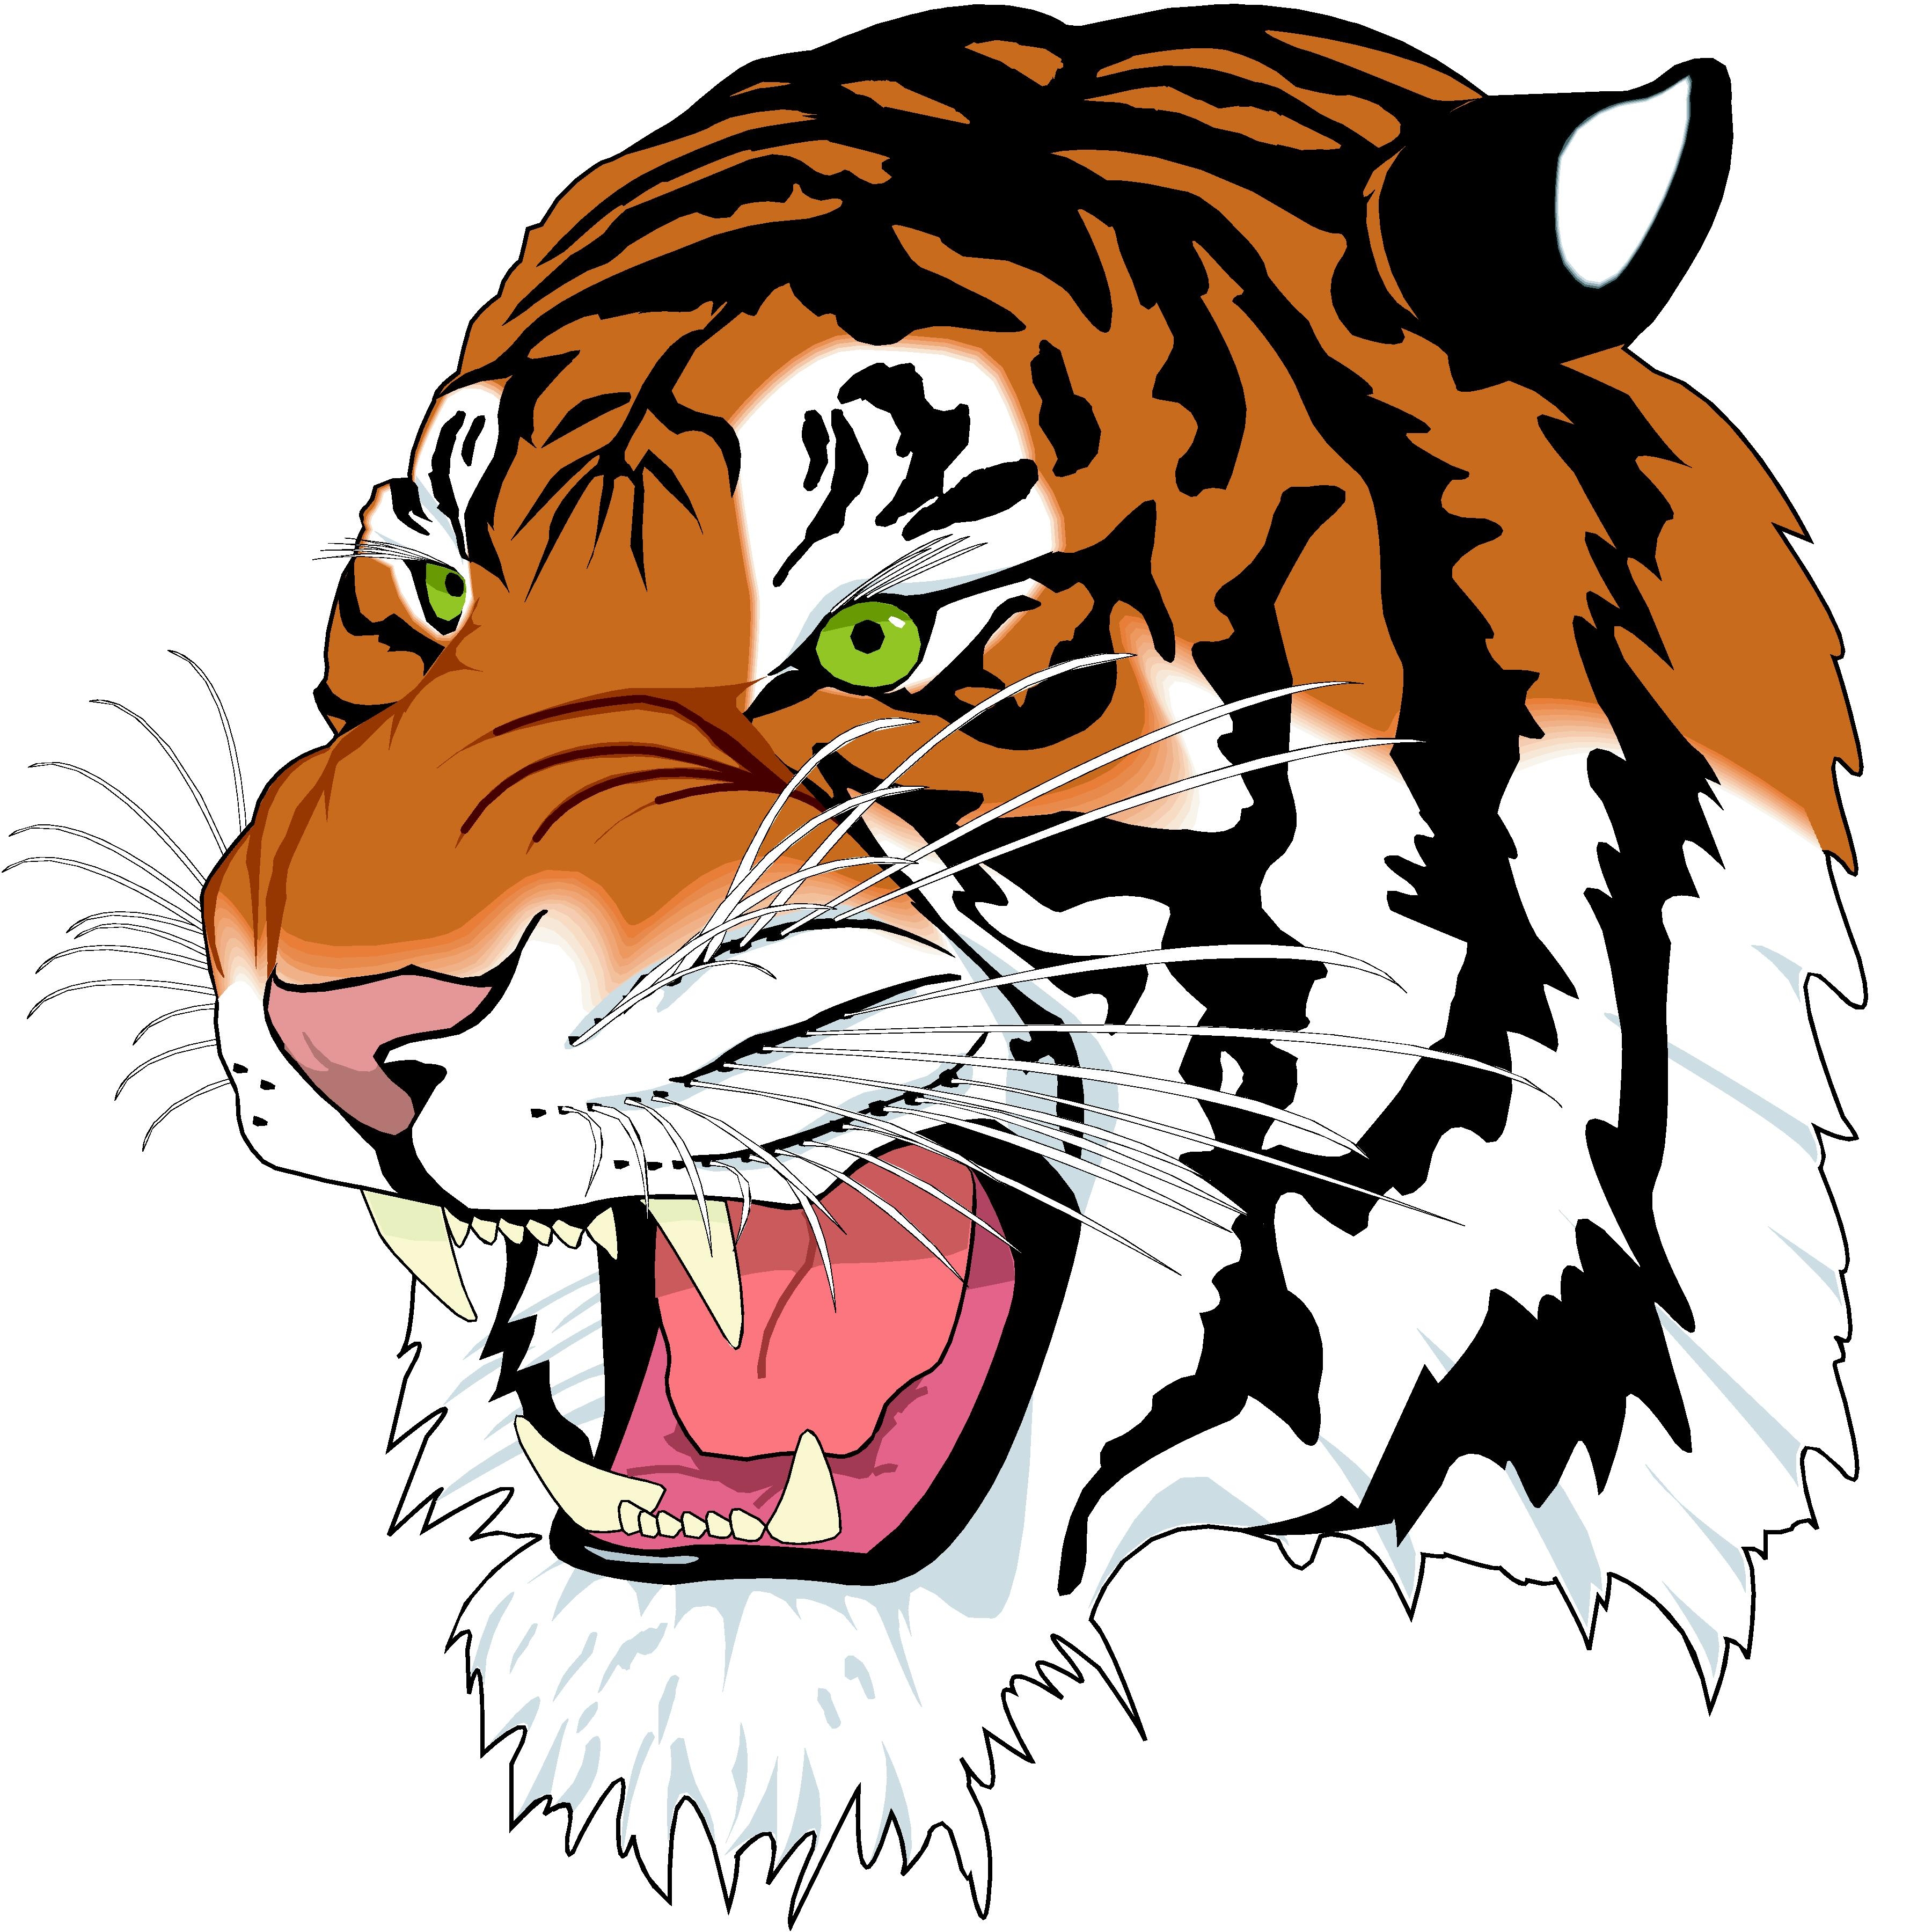 Tiger logo cliparts free download clip art on